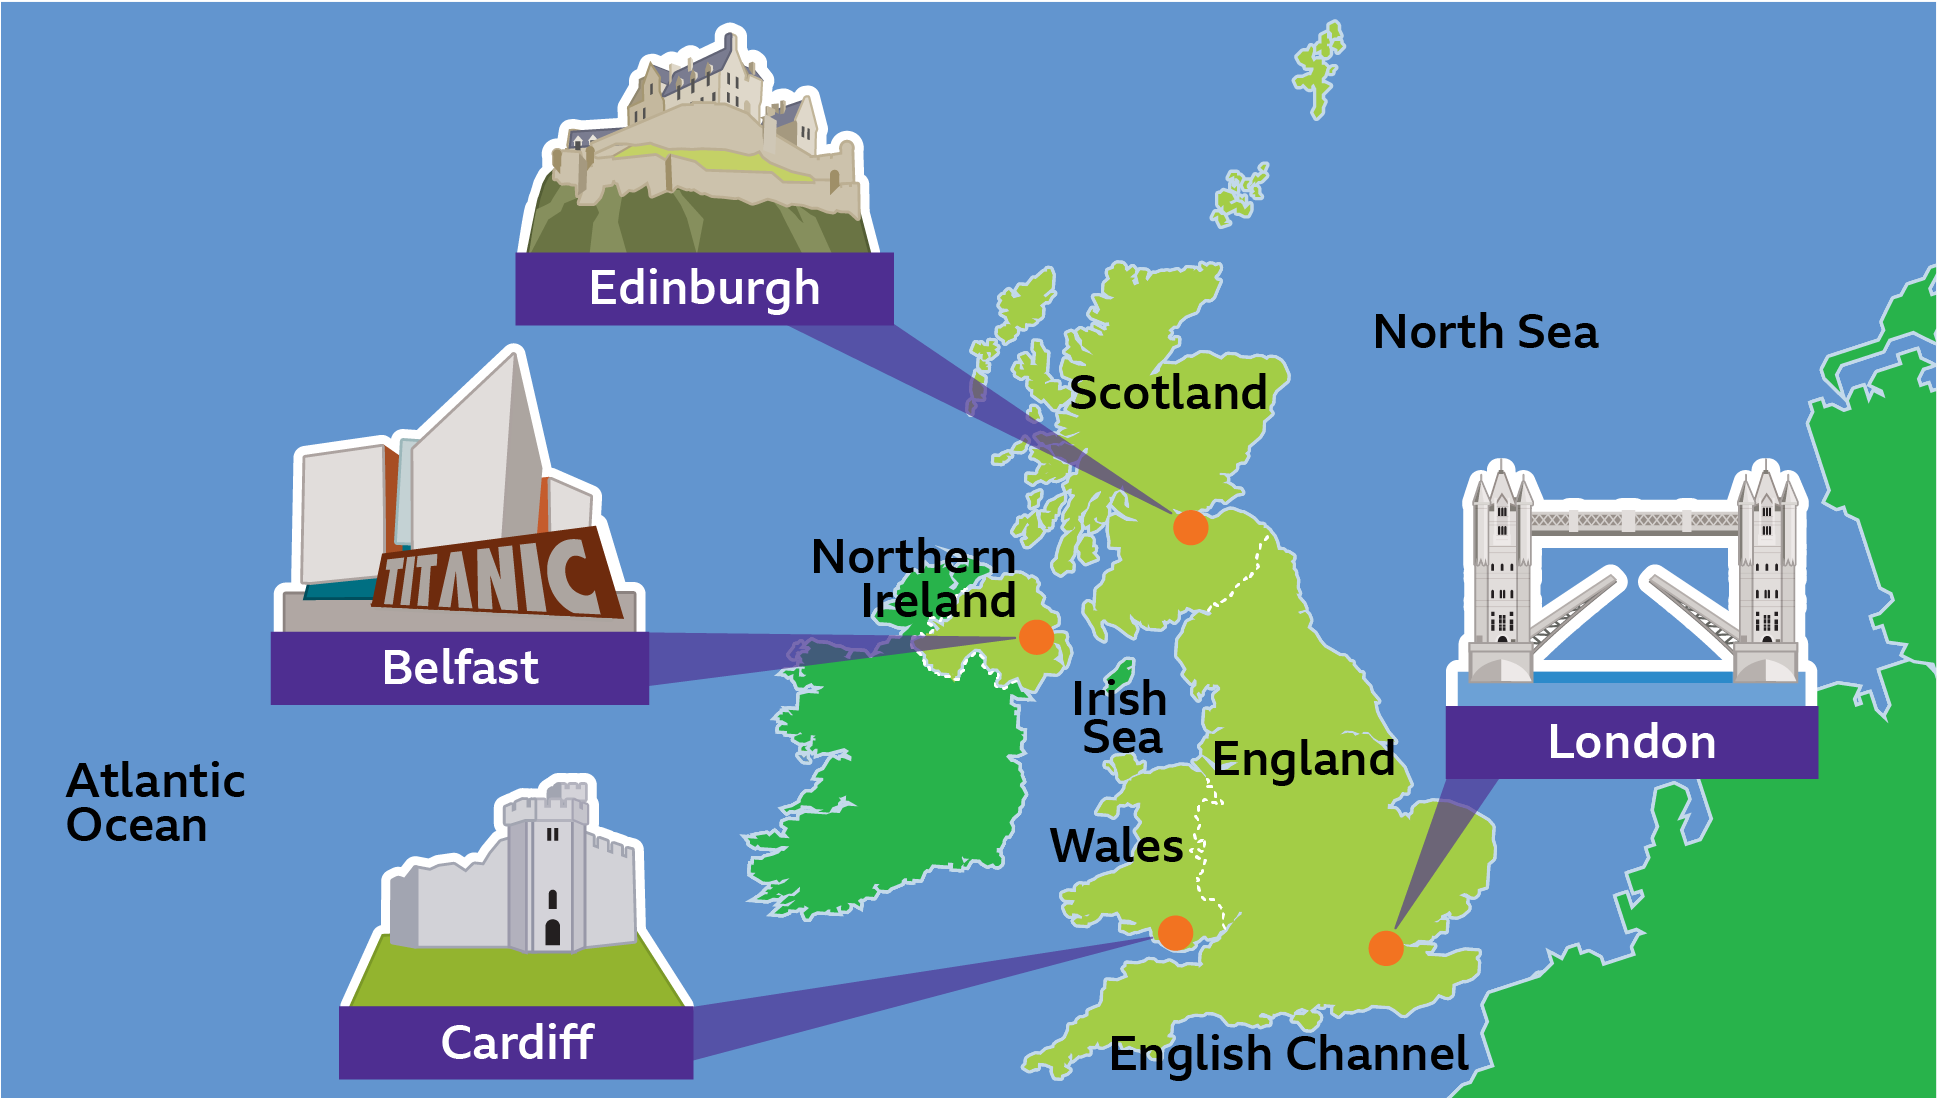 A cartoon map of the UK showing England, Northern Ireland, Scotland and Wales and their capital cities: London, Belfast, Edinburgh and Cardiff. It also shows the Atlantic Ocean, English Sea, Irish Sea and North Sea surrounding the UK.